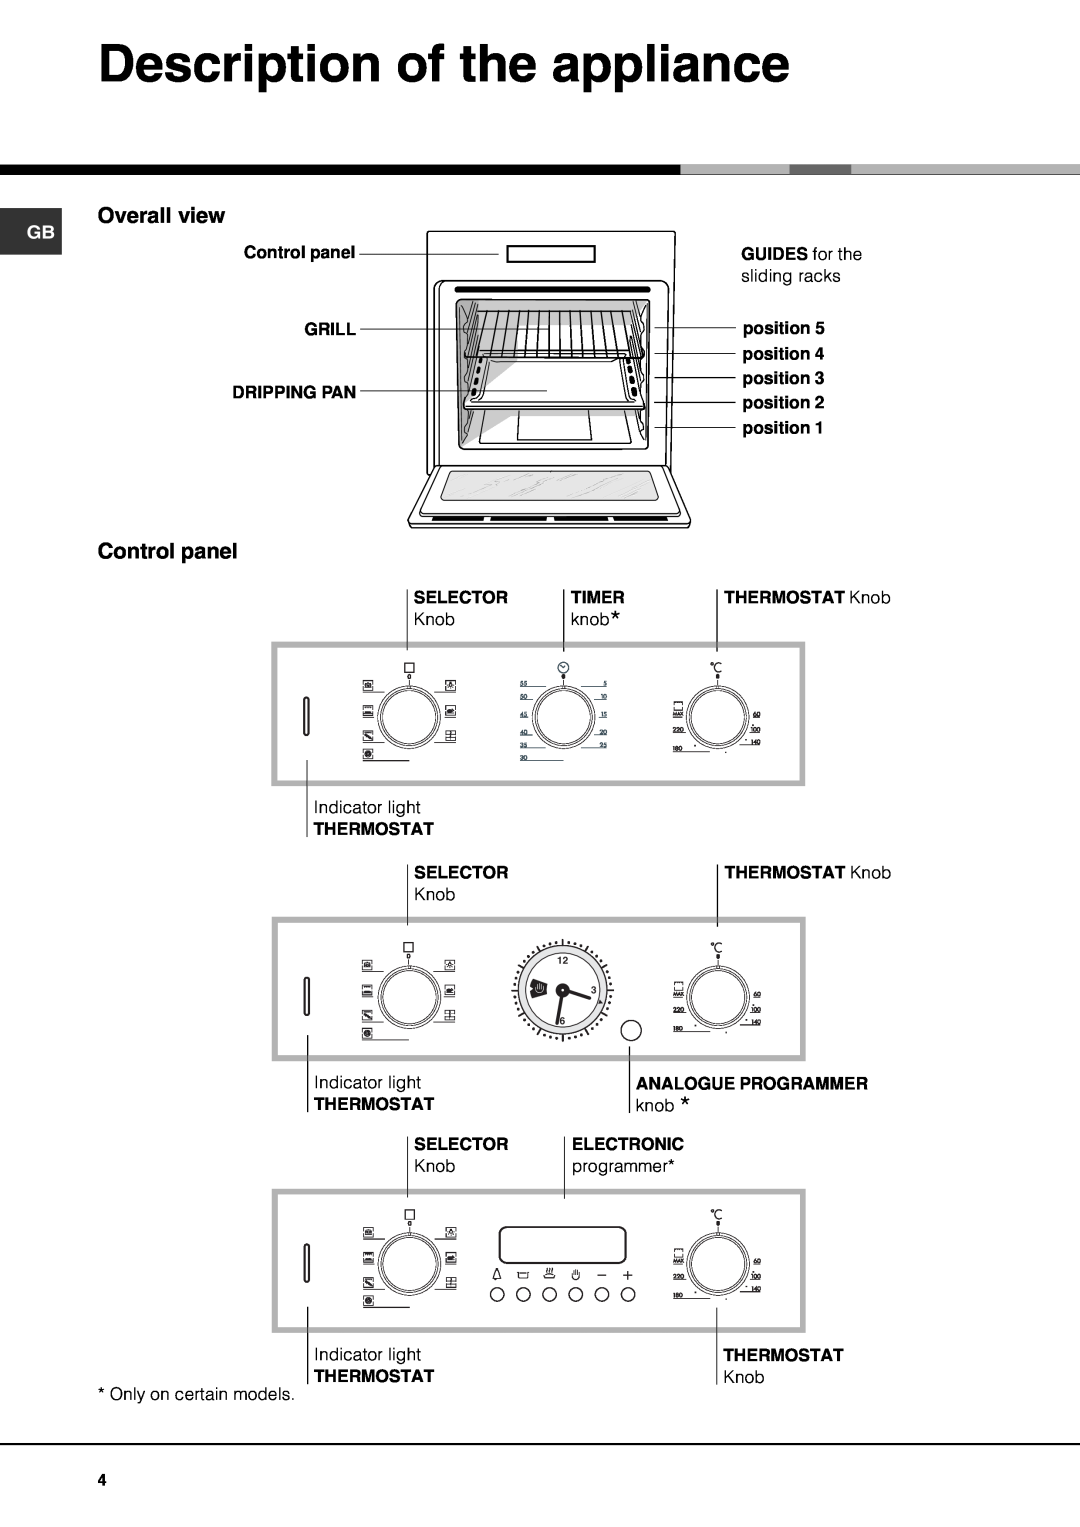 Hotpoint SQ61I manual Description of the appliance, Control panel GRILL DRIPPING PAN, GUIDES for the, Analogue Programmer 